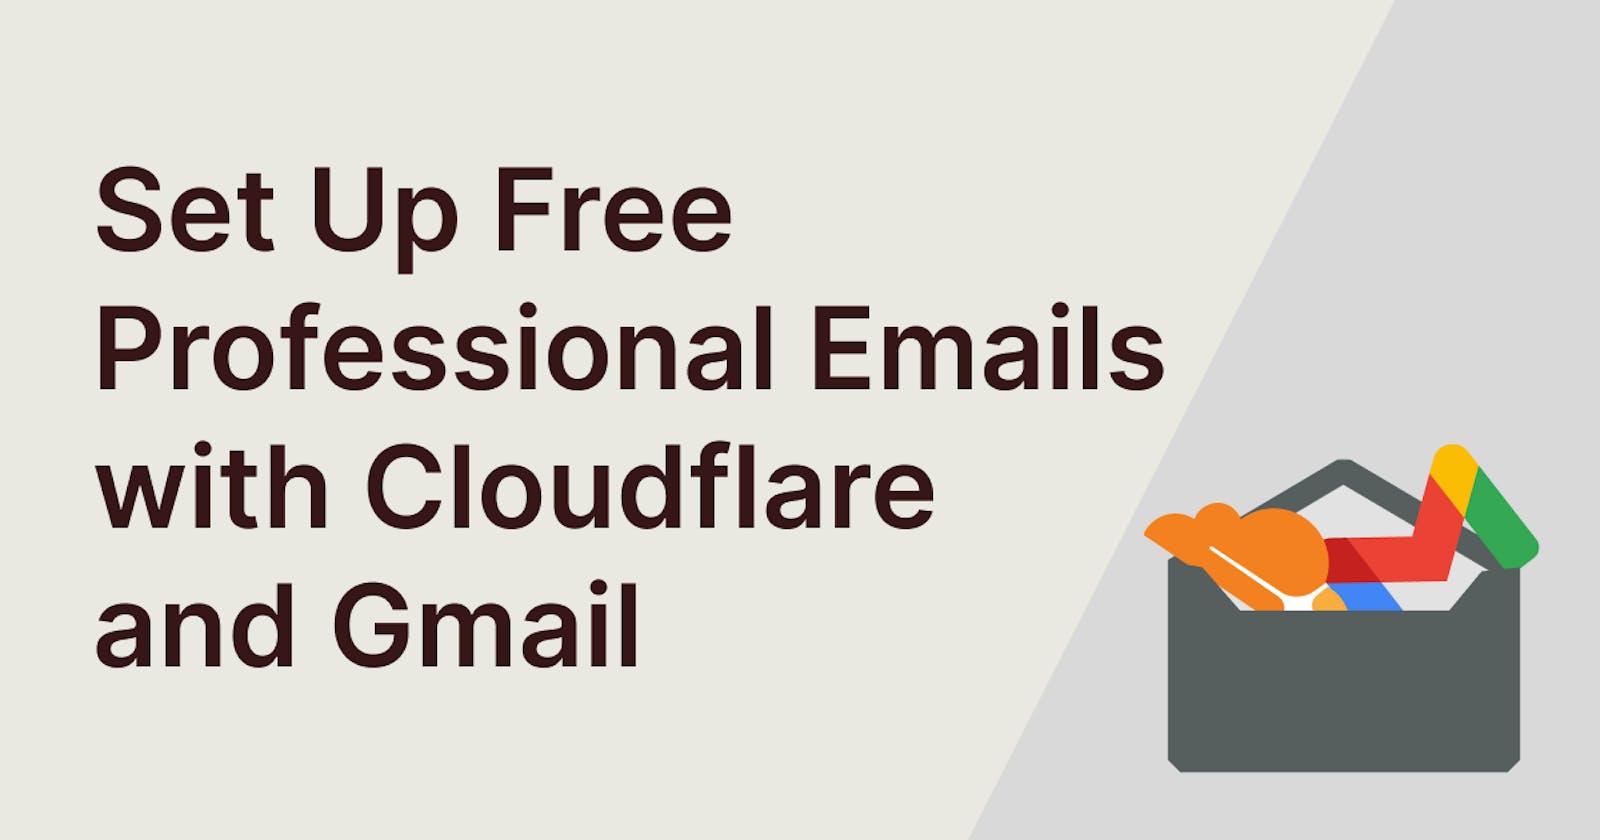 Set Up Free Professional Emails with Cloudflare and Gmail